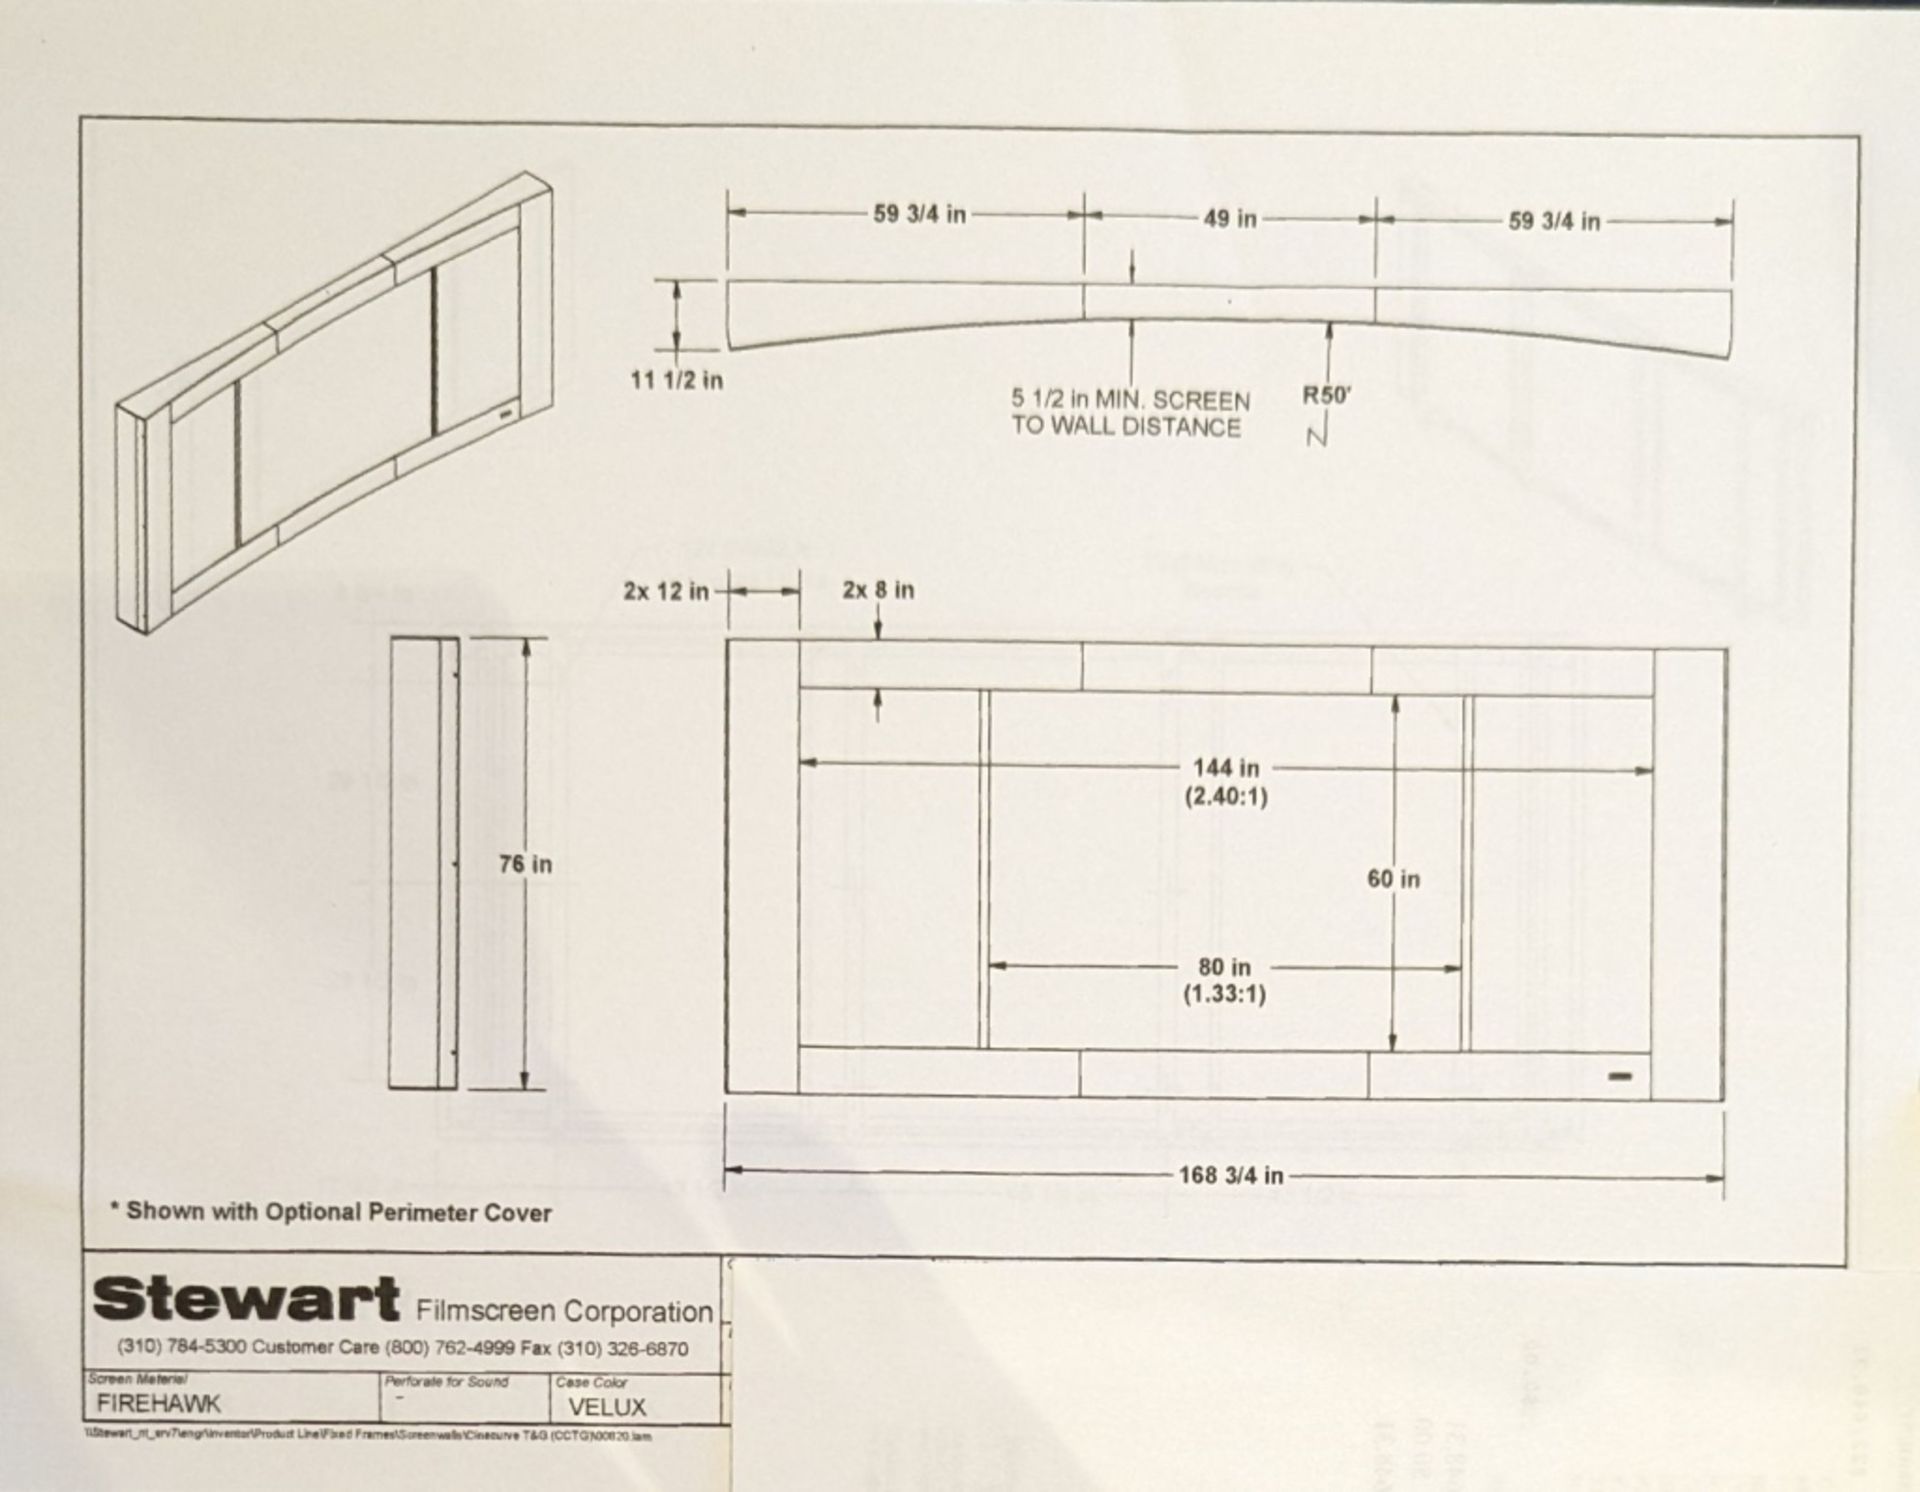 STEWART 156" CINECURVE PROJECTION SCREEN - Image 2 of 2